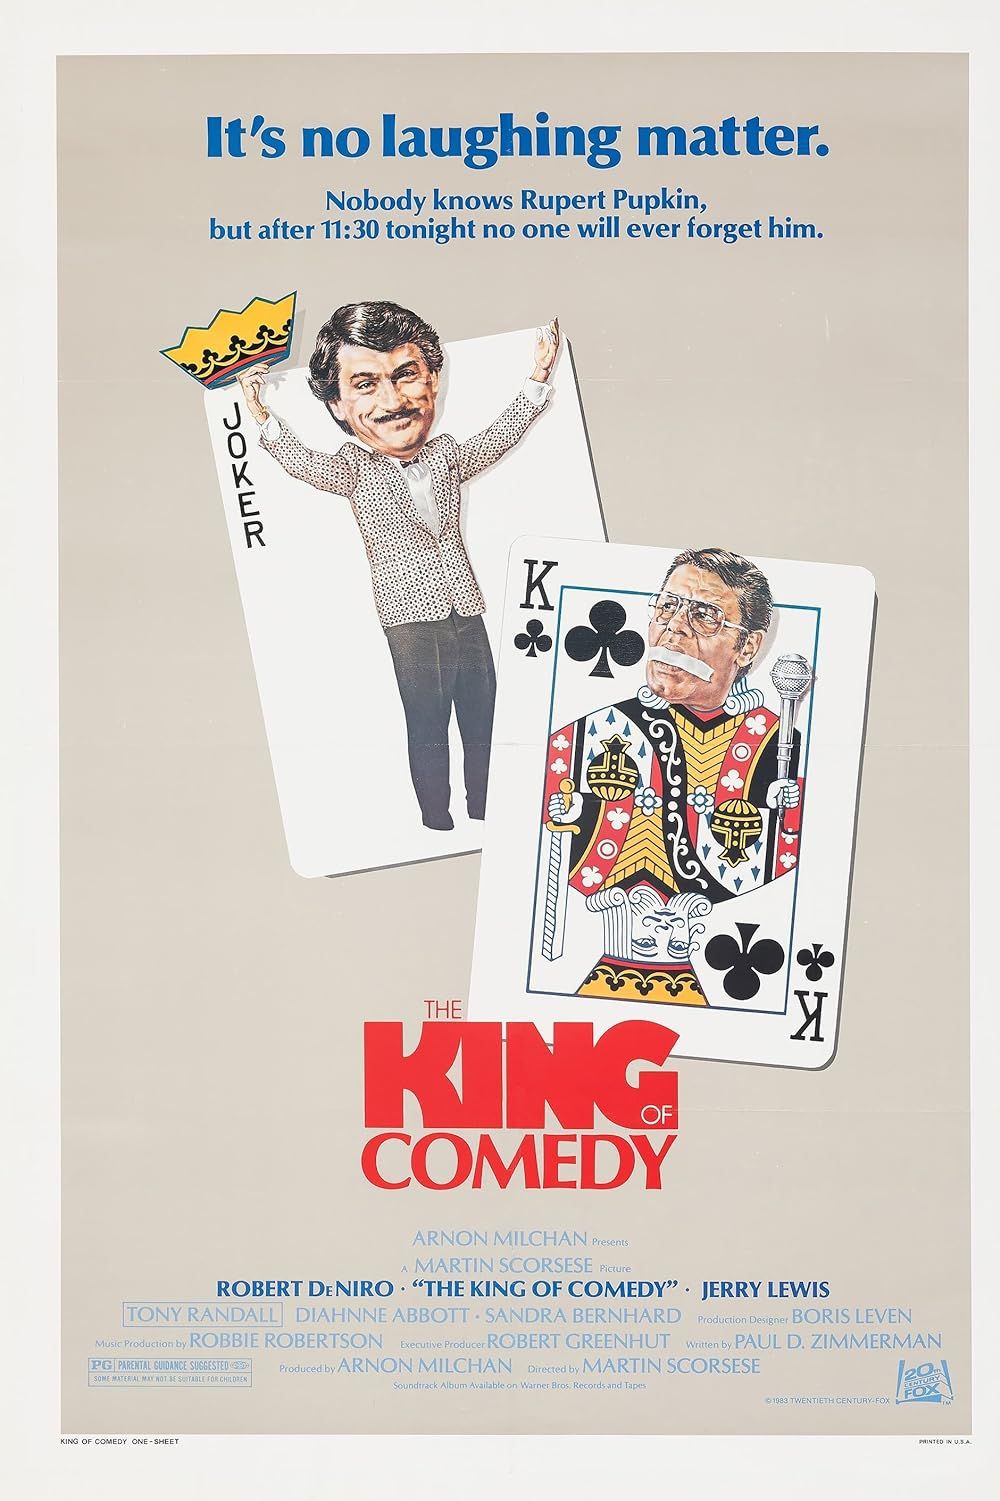 The King of Comedy illustrated poster with Robert De Niro and Jerry Lewis as playing cards.